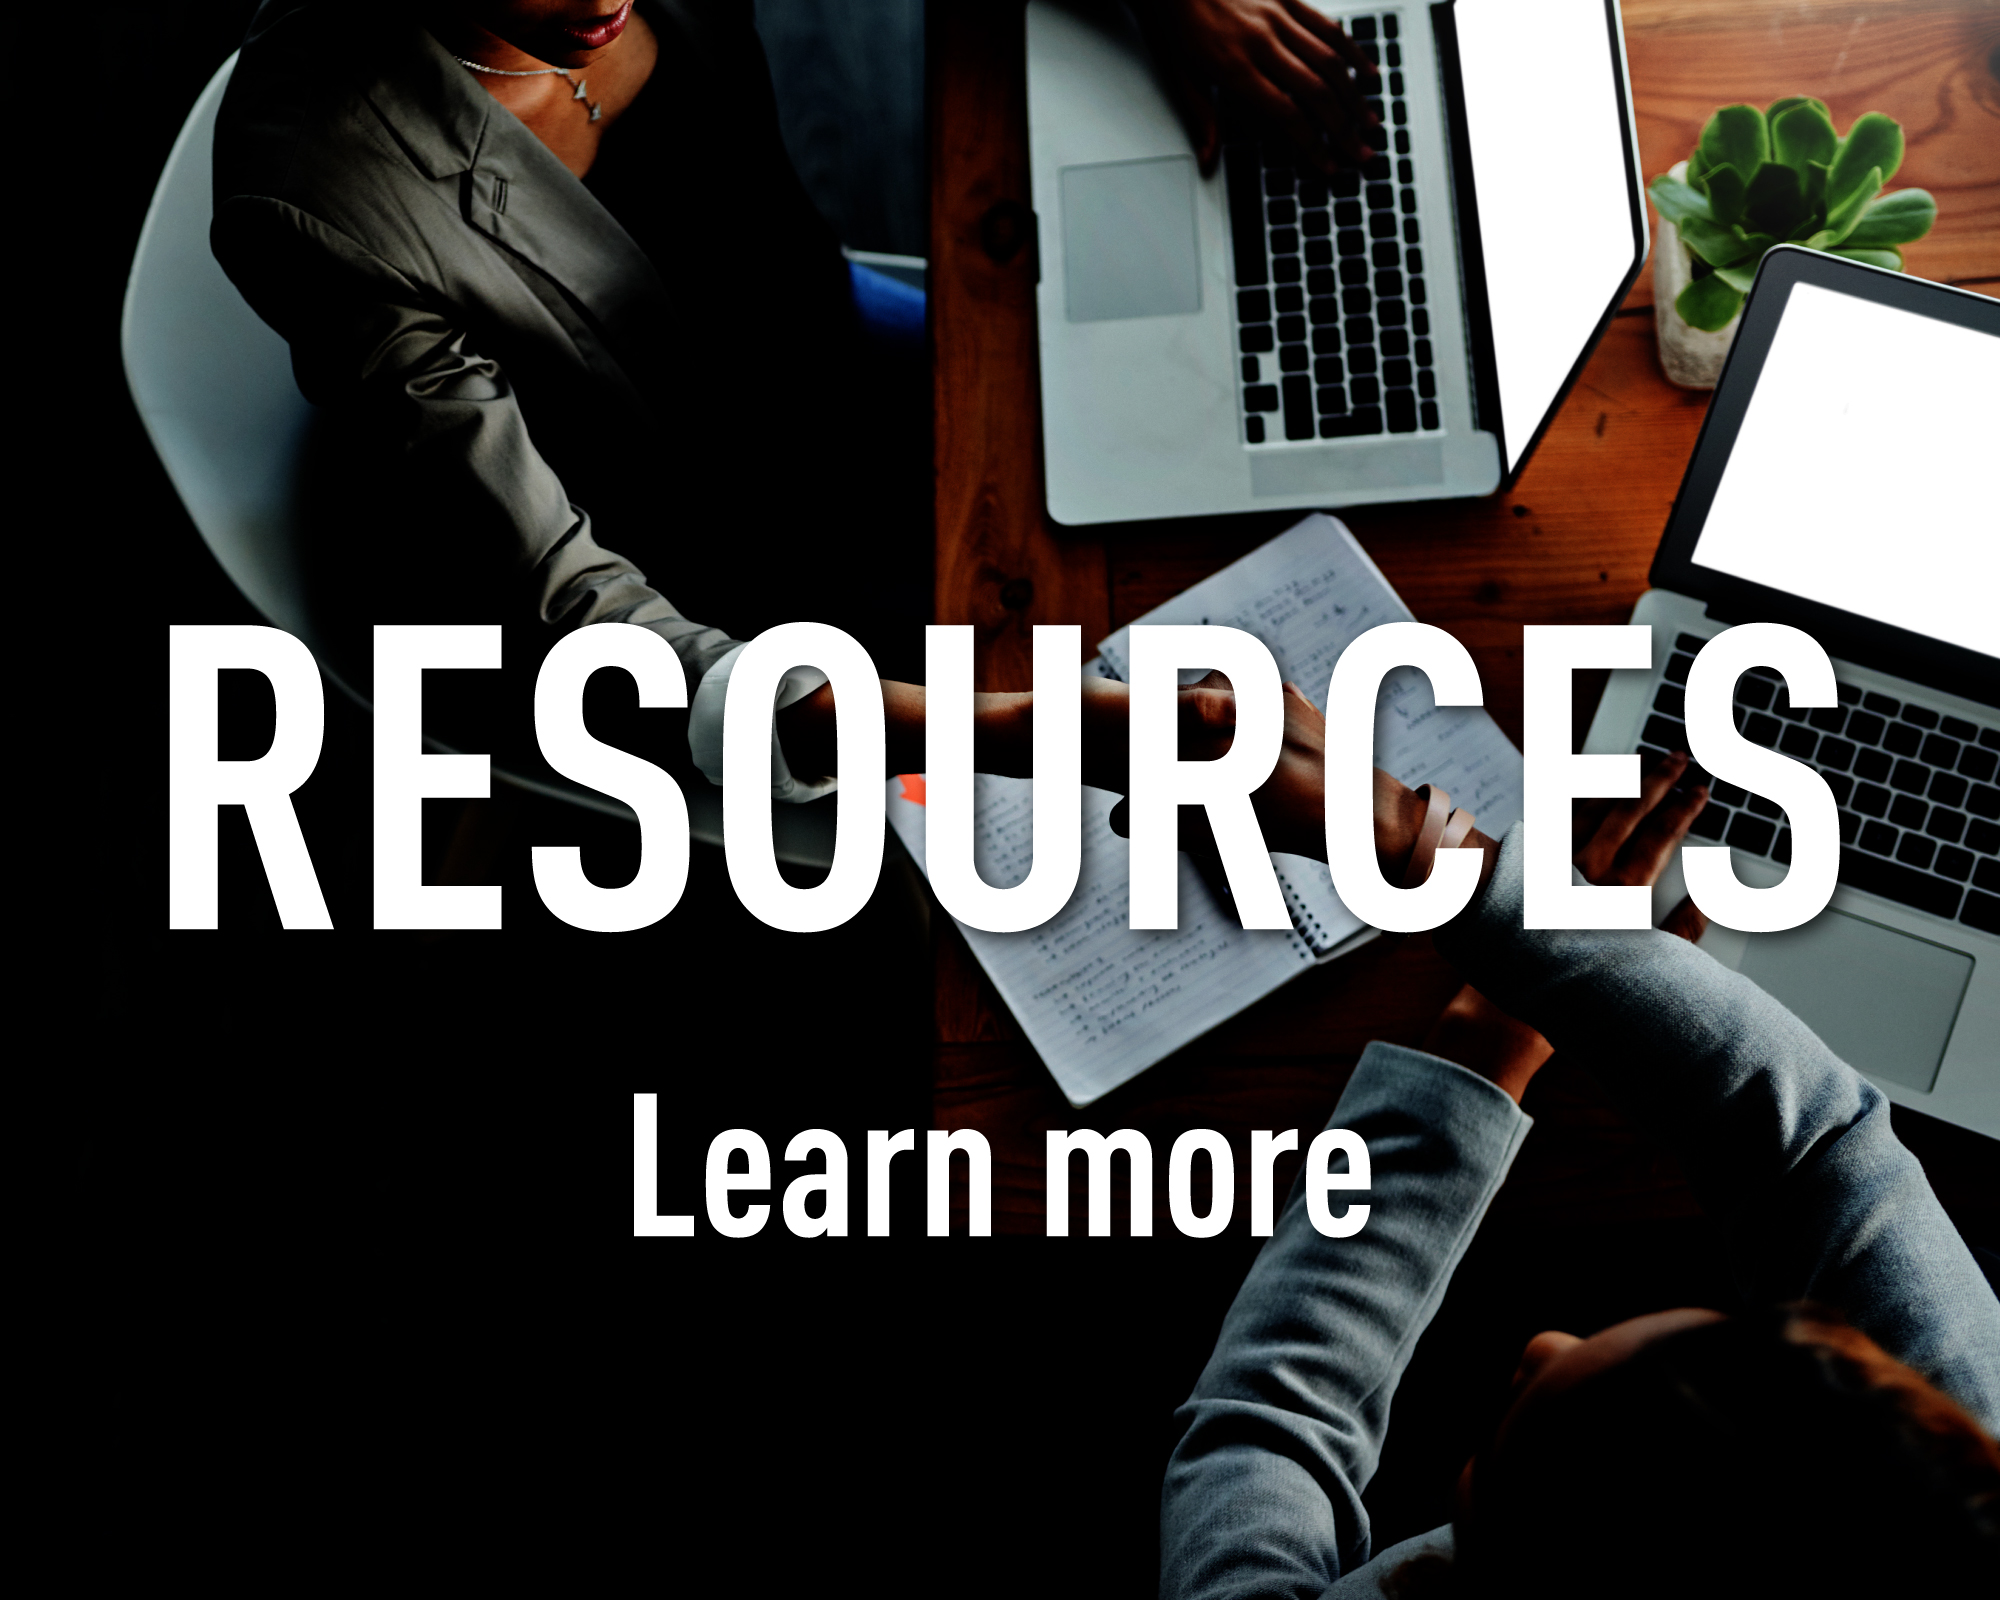 Resources. Learn more